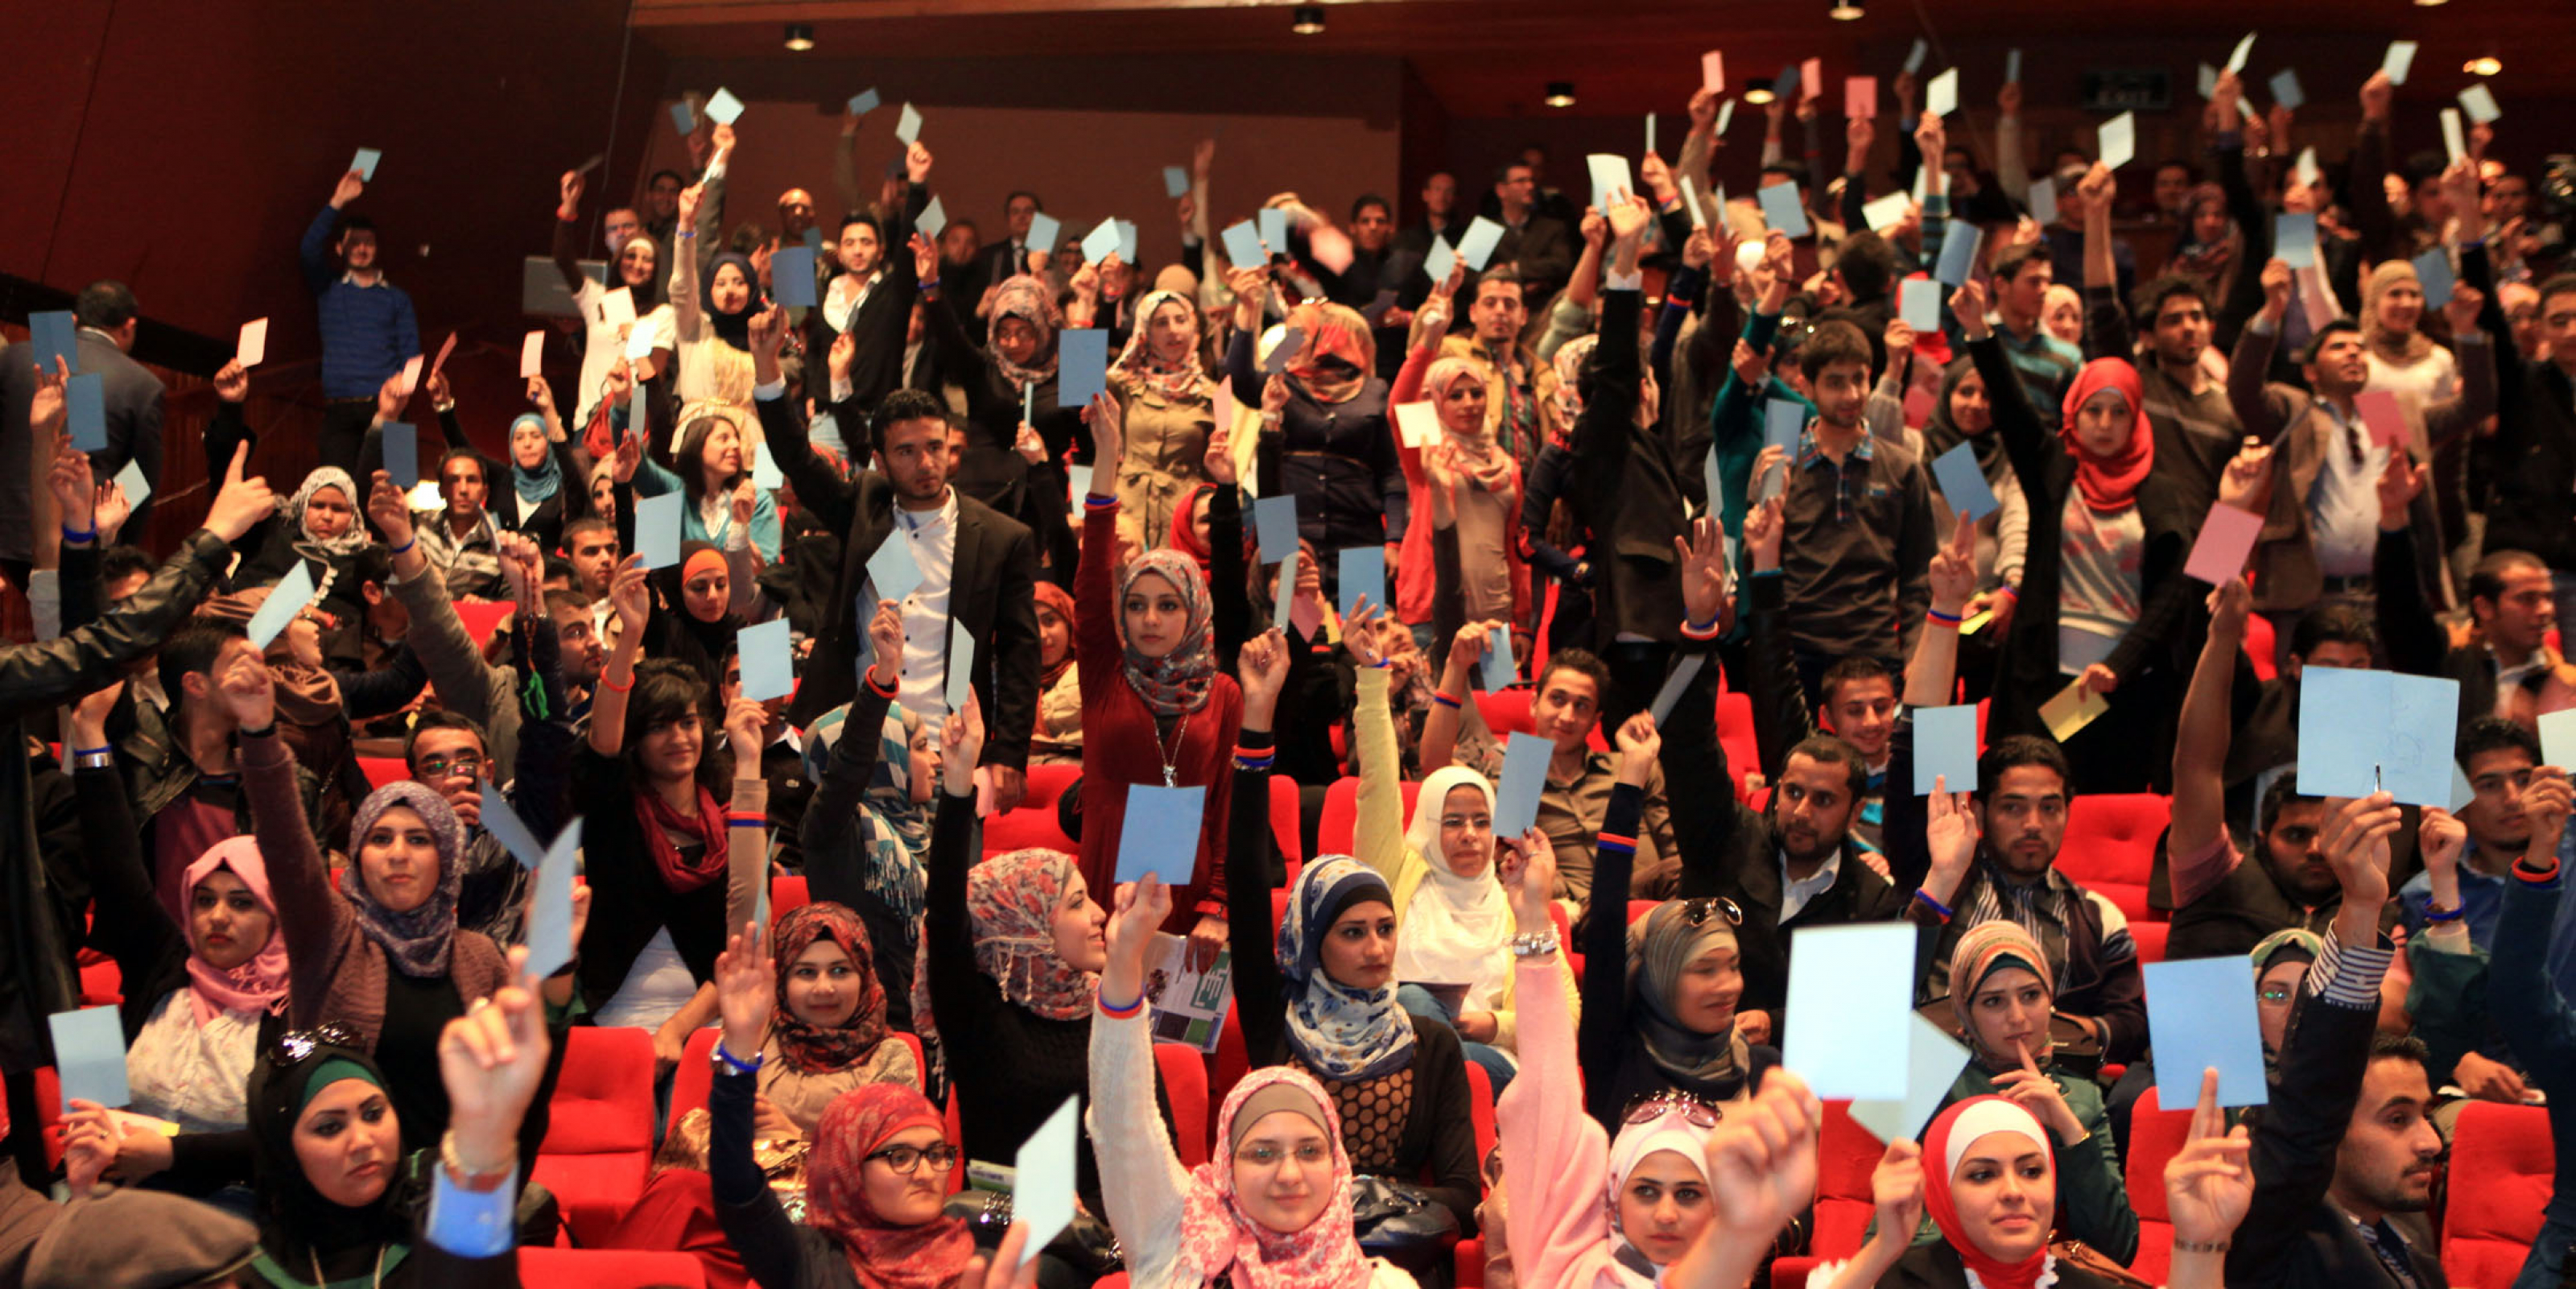 NDI Debate-Audience hold up cards to vote for the debate team from Yarmouk University, winner of Jordan's first-ever national student debate competition_Debating on allowing parties to operate in universities.JPG